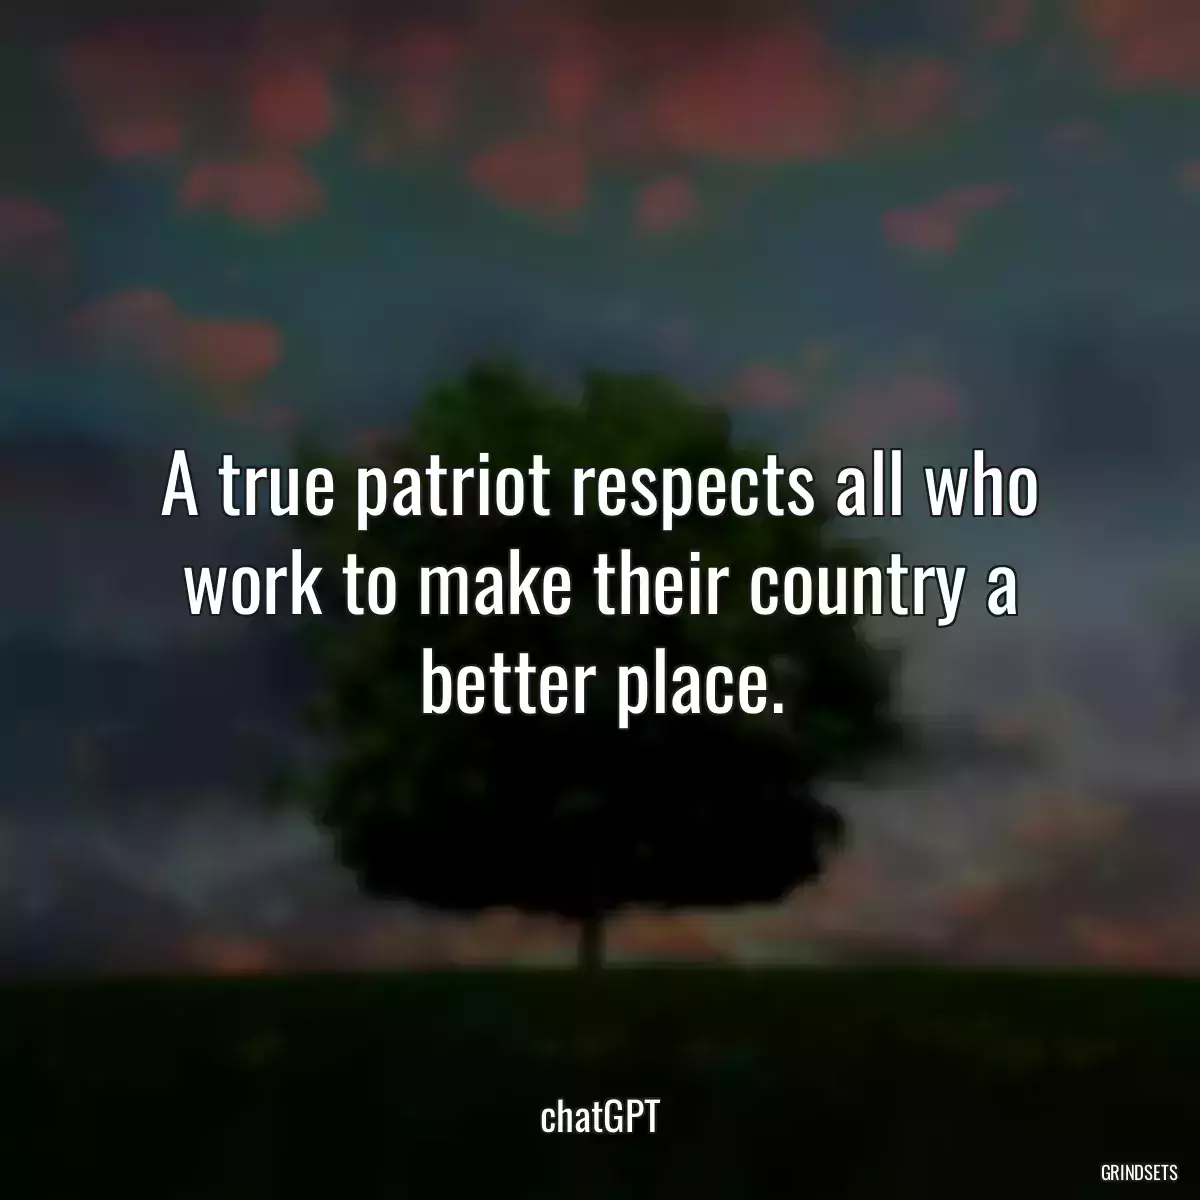 A true patriot respects all who work to make their country a better place.